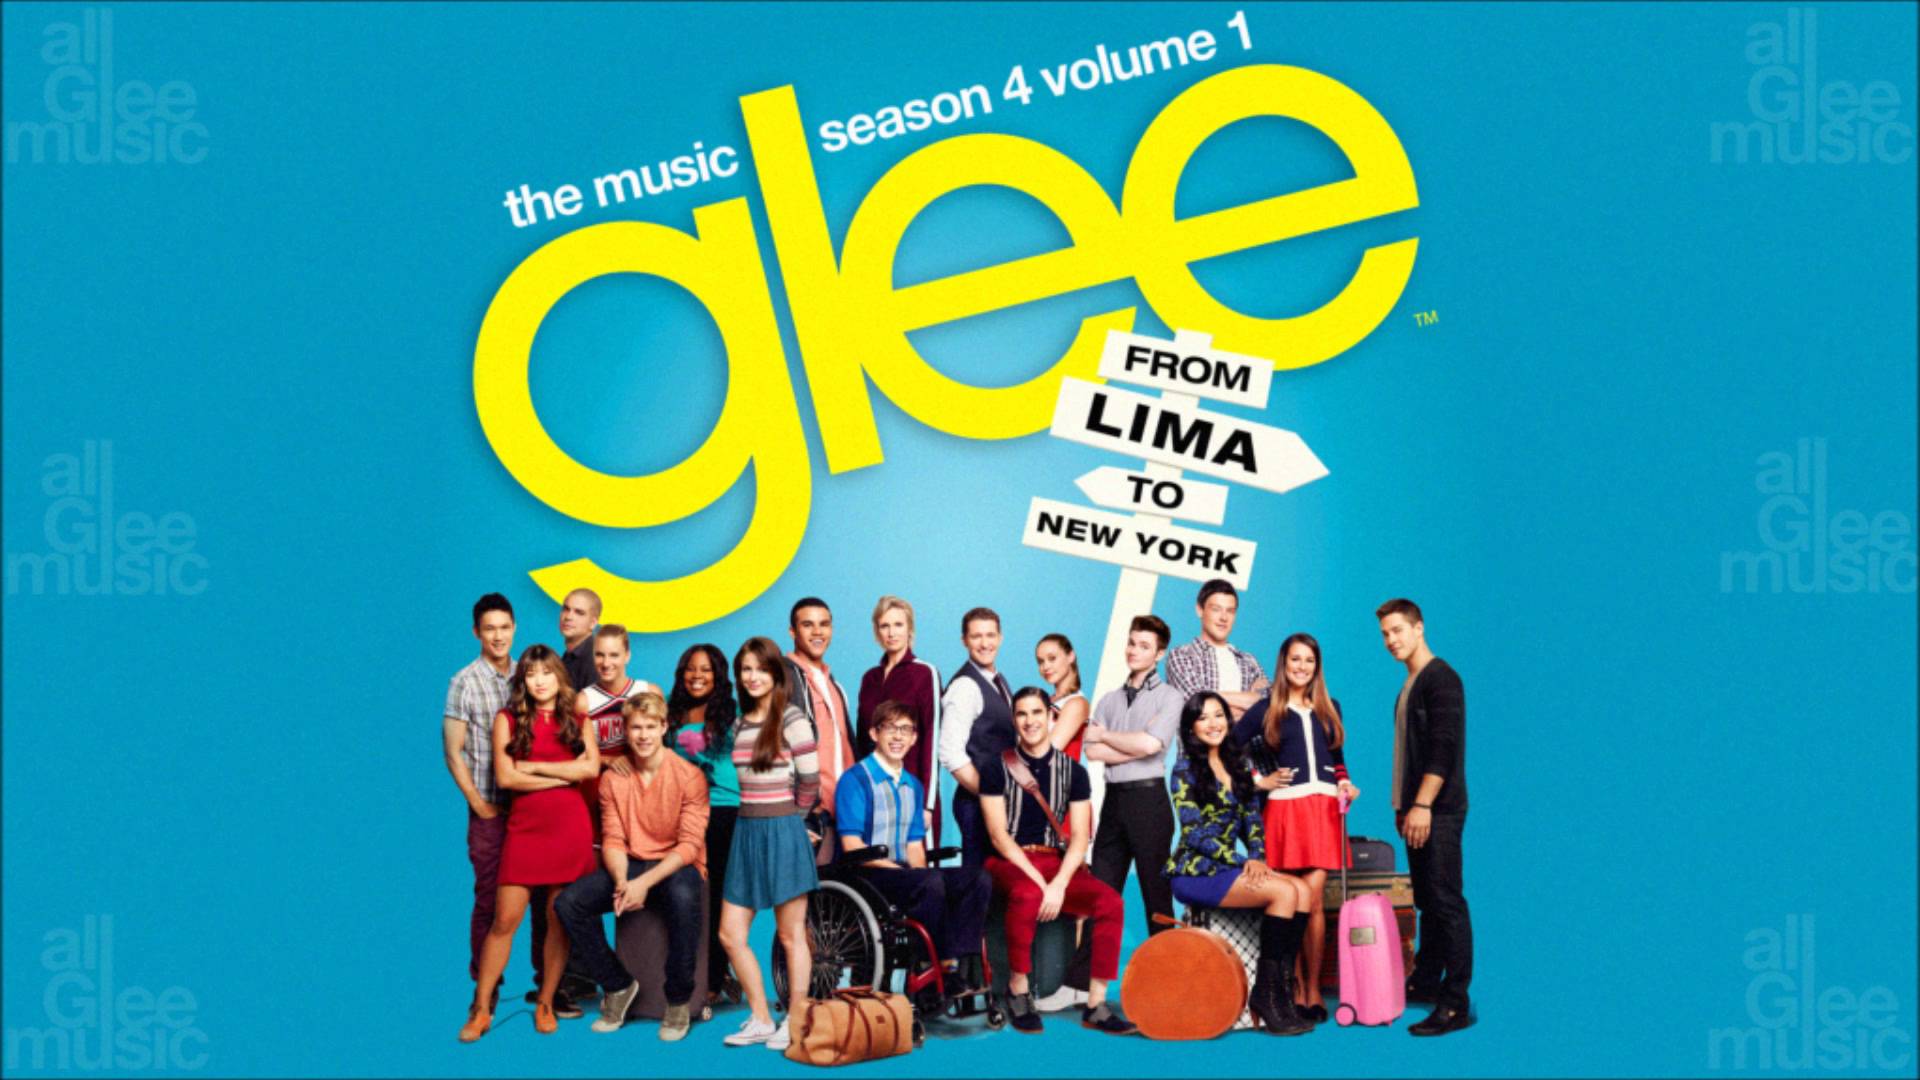 Free Download Glee Hd Wallpapers For Desktop Download 19x1080 For Your Desktop Mobile Tablet Explore 76 Glee Desktop Wallpaper Free Wallpapers For Desktop Free Awesome Desktop Wallpaper Glee Wallpaper For Phone